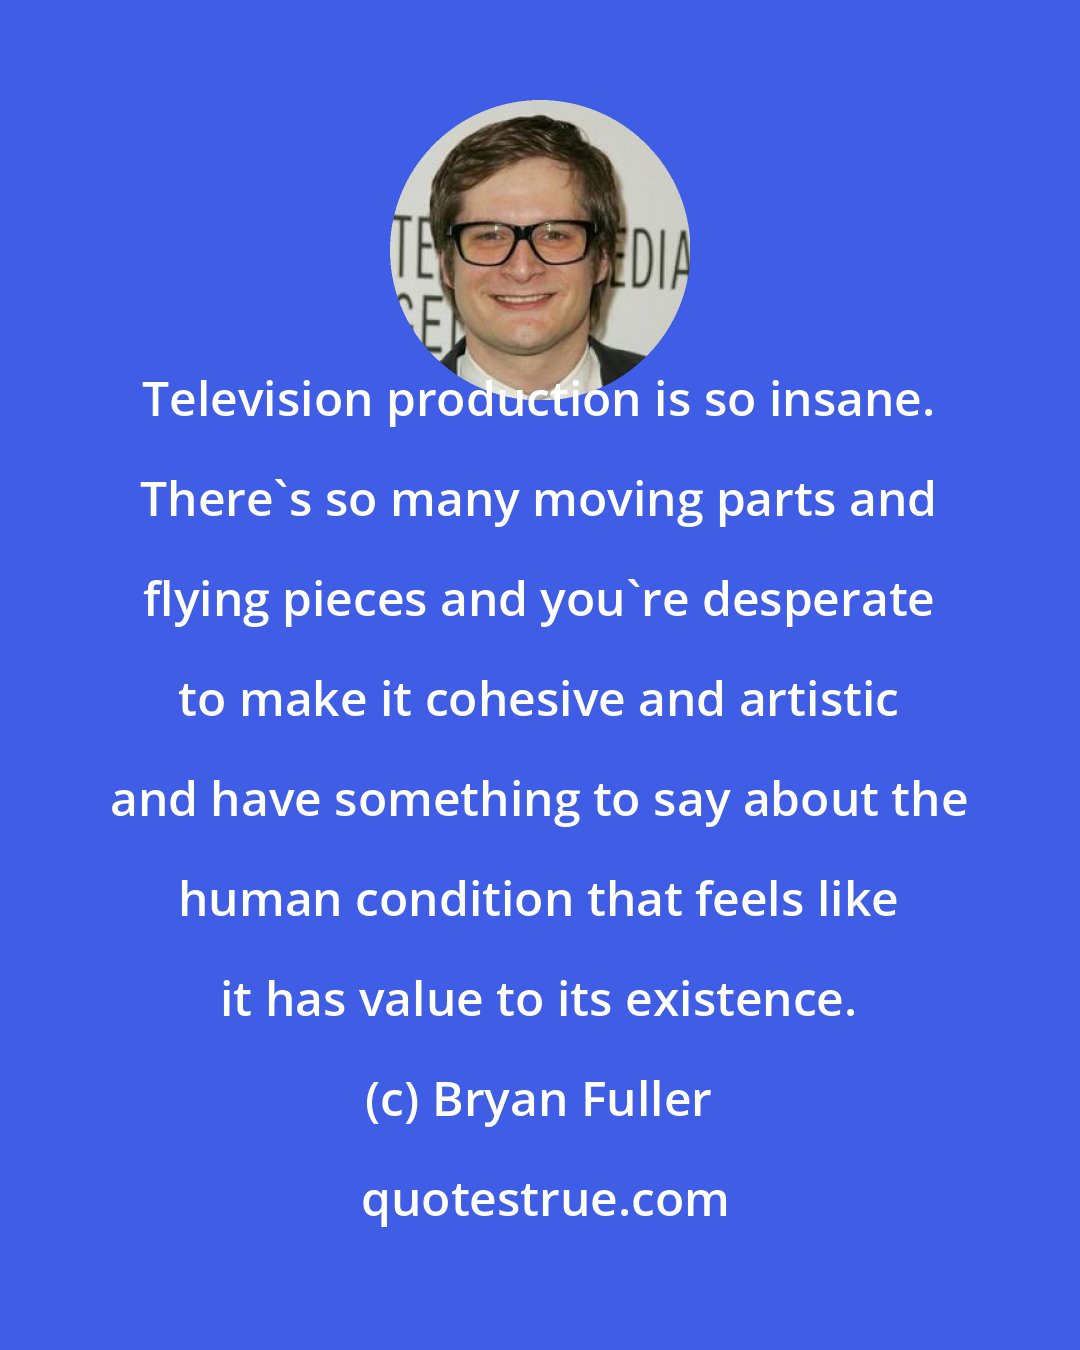 Bryan Fuller: Television production is so insane. There's so many moving parts and flying pieces and you're desperate to make it cohesive and artistic and have something to say about the human condition that feels like it has value to its existence.